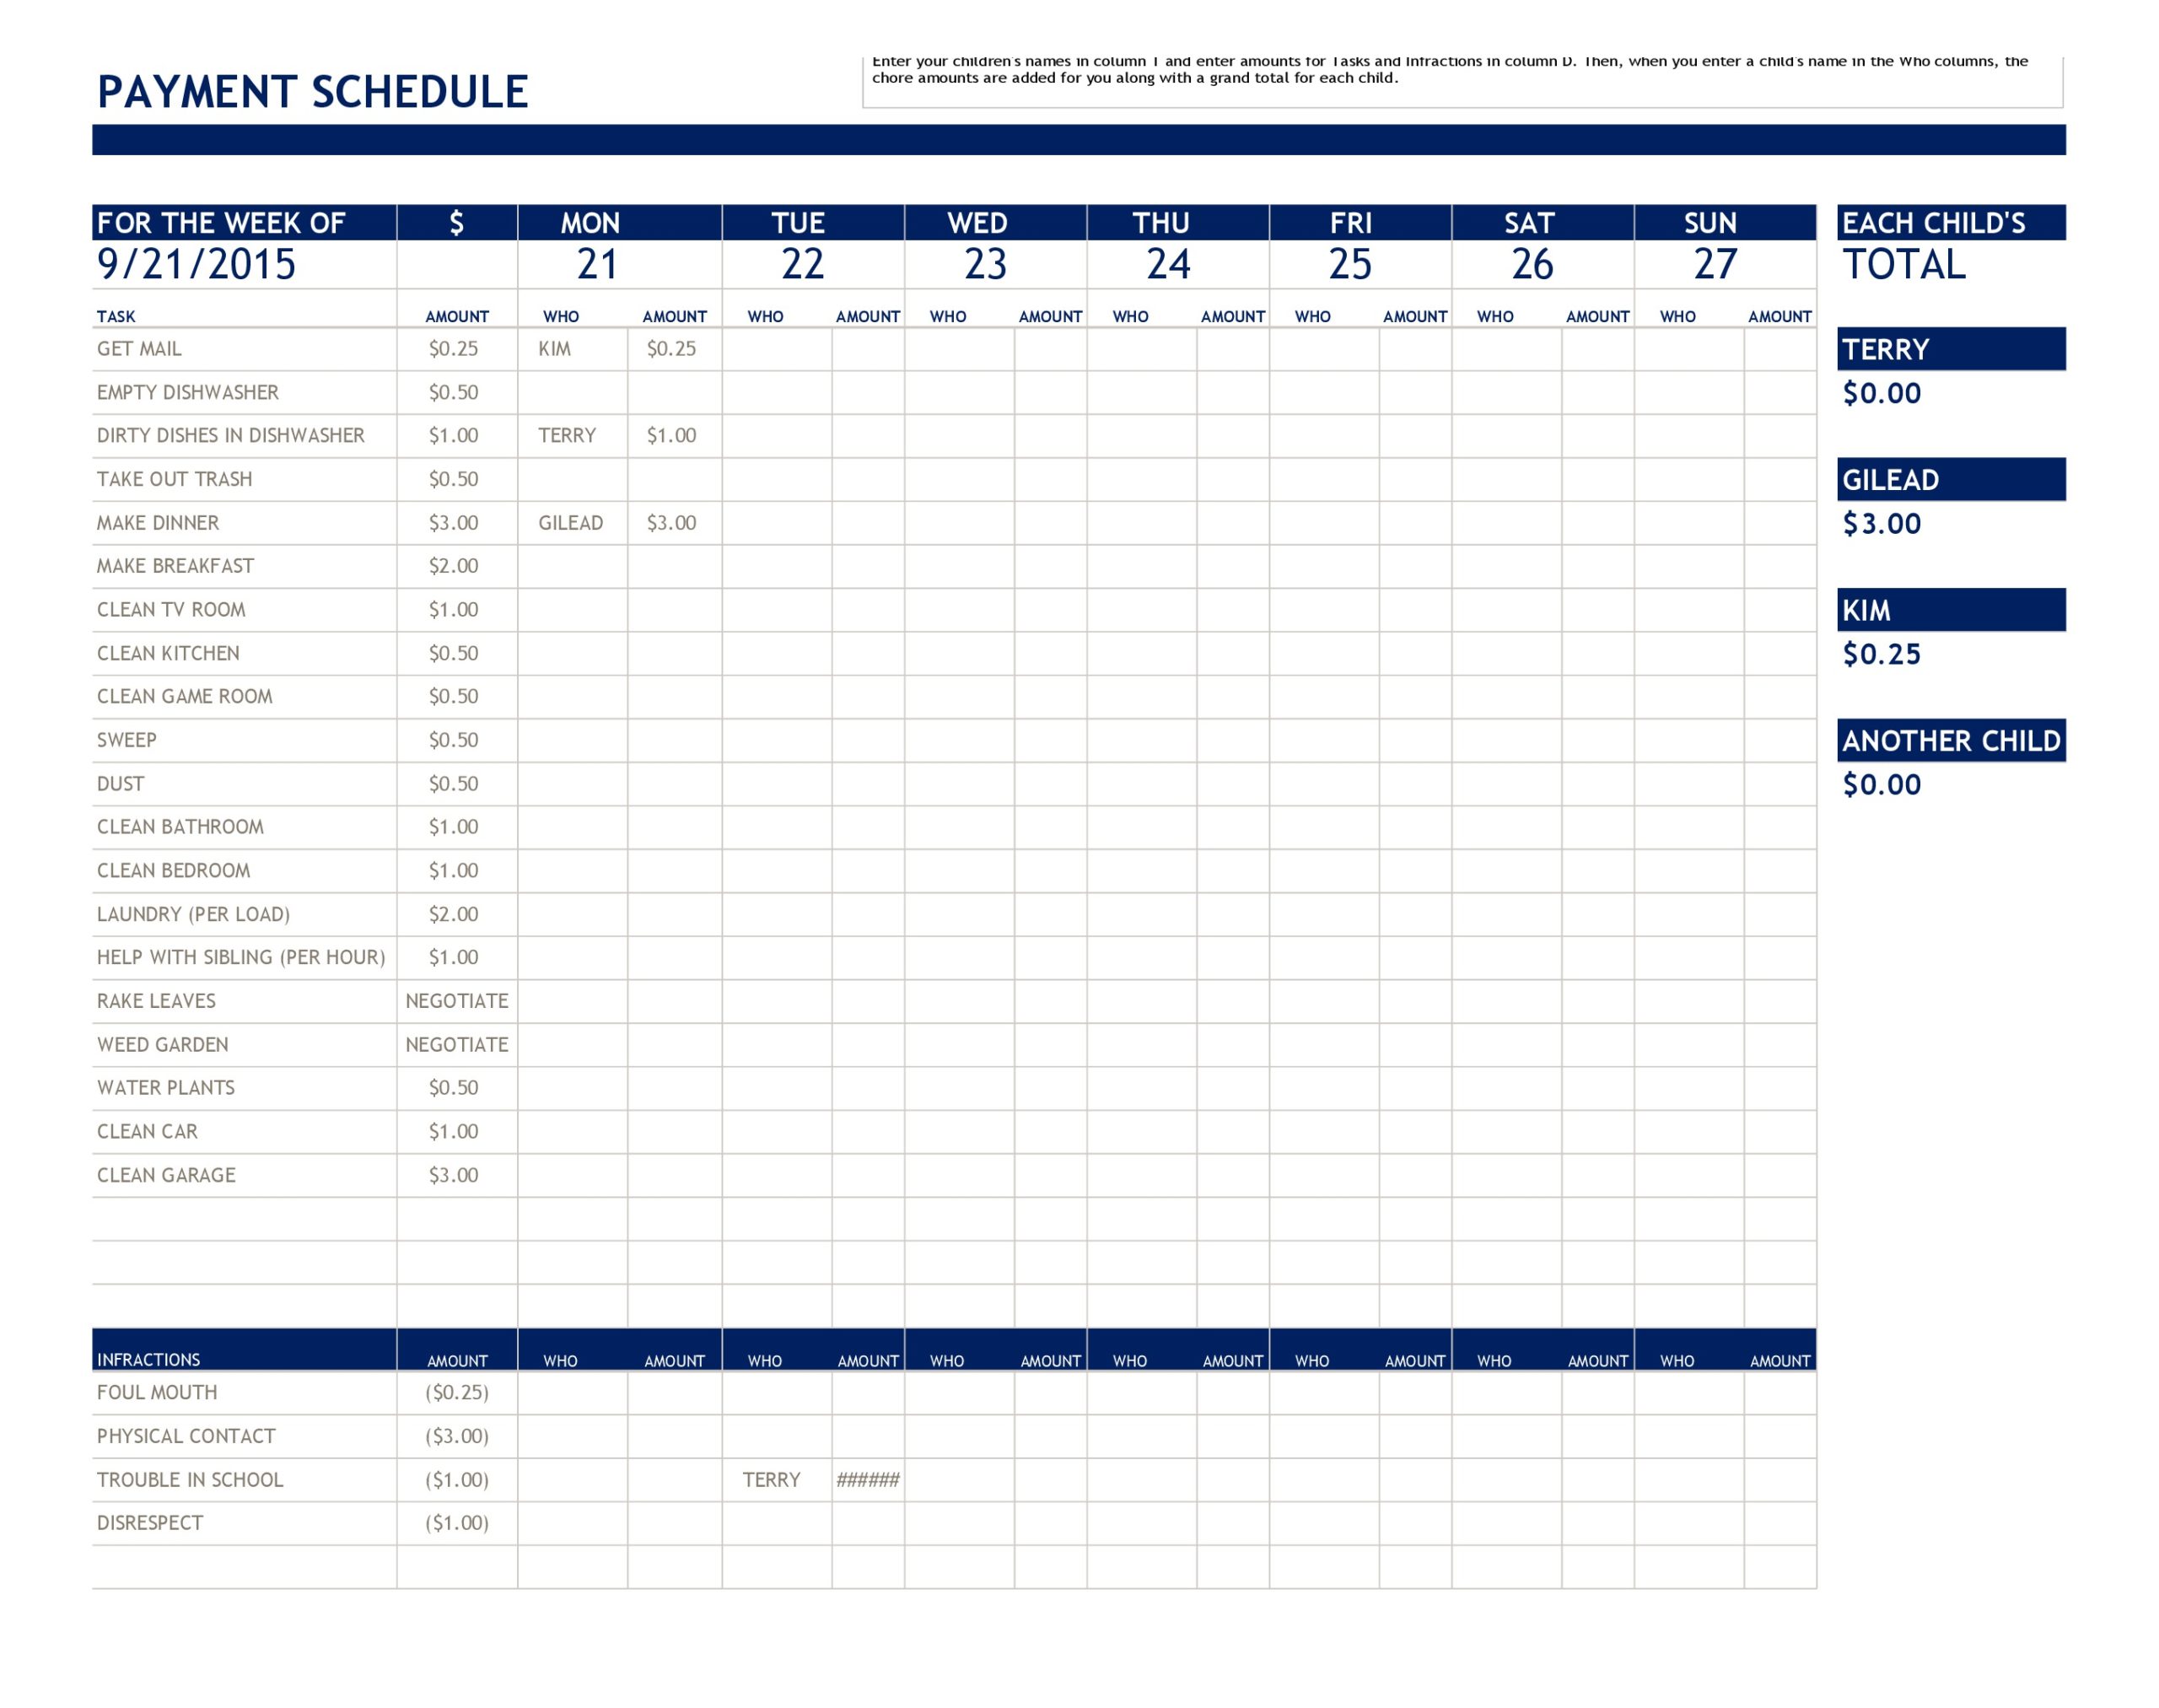 49 Free Payment Schedule Templates Excel Word ᐅ TemplateLab